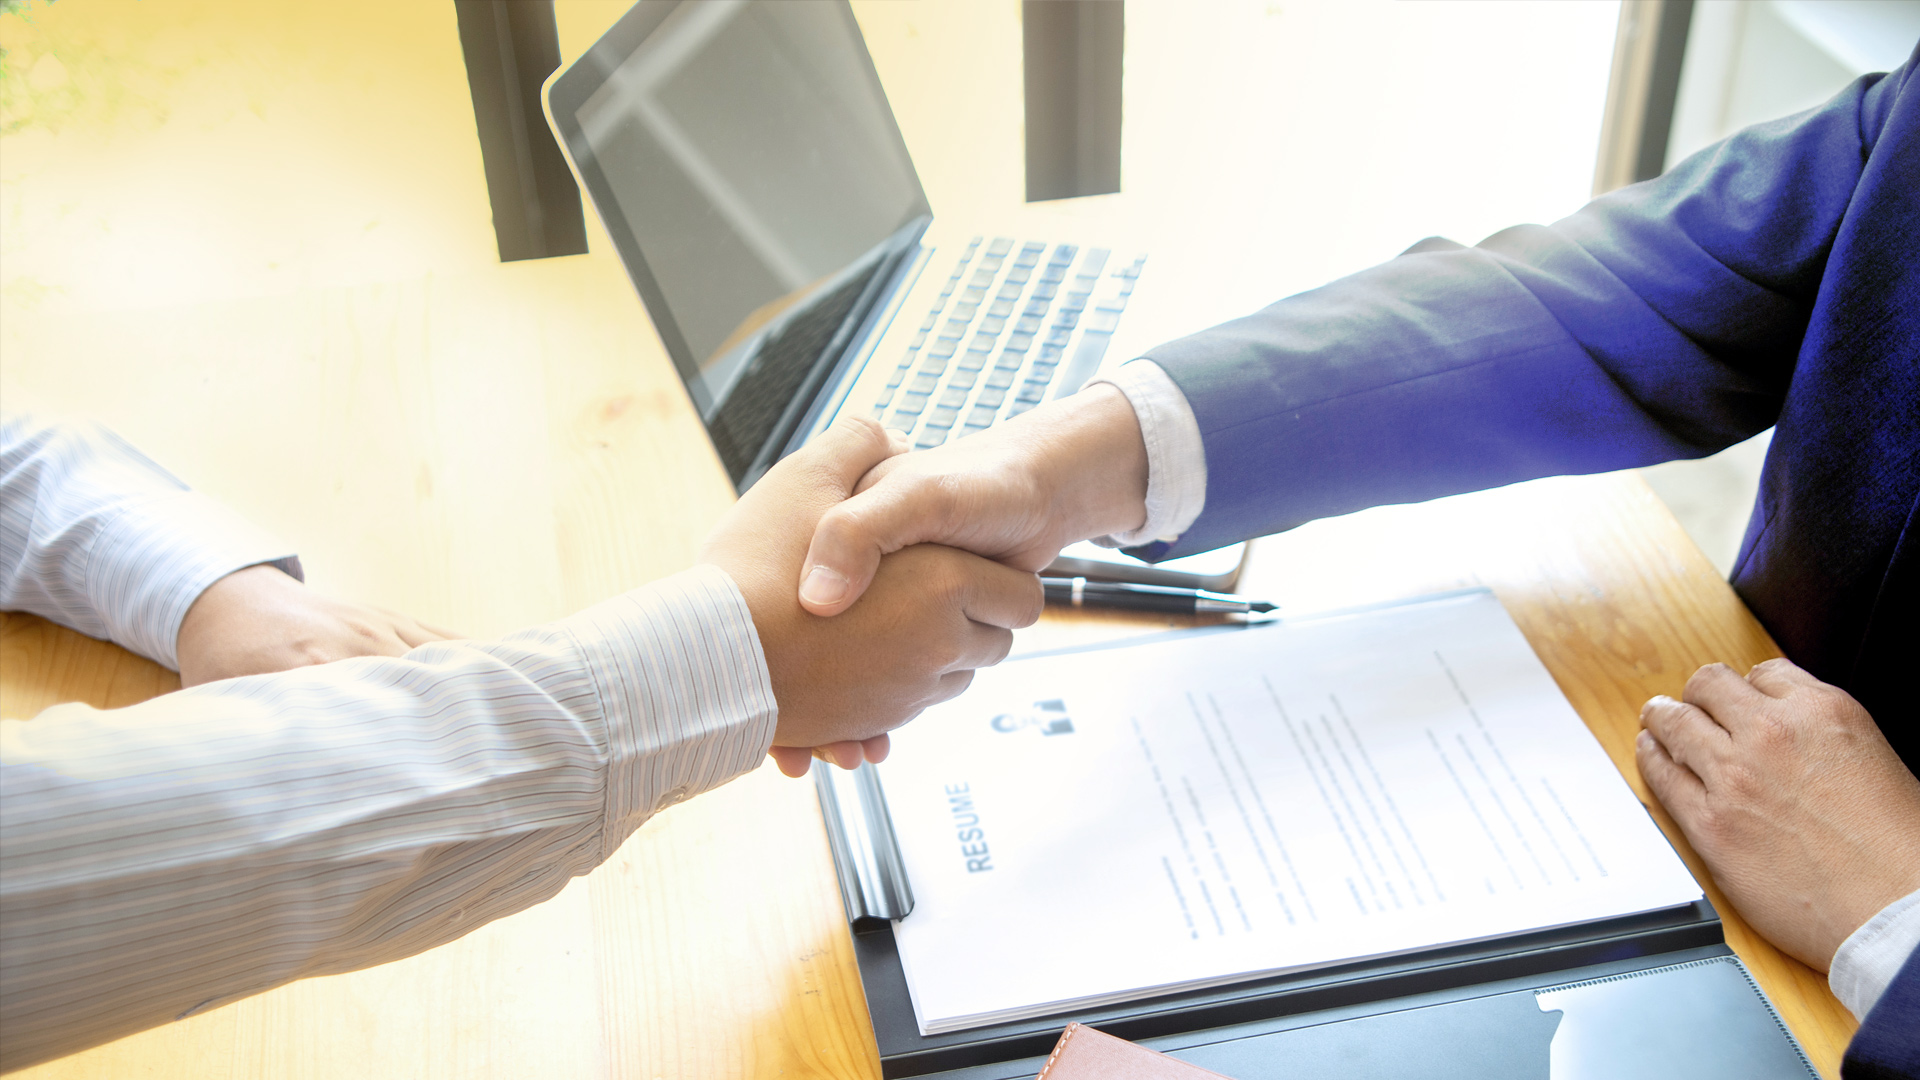 A close-up on a handshake of two people. On the desk below, there is a laptop and a file with documents.